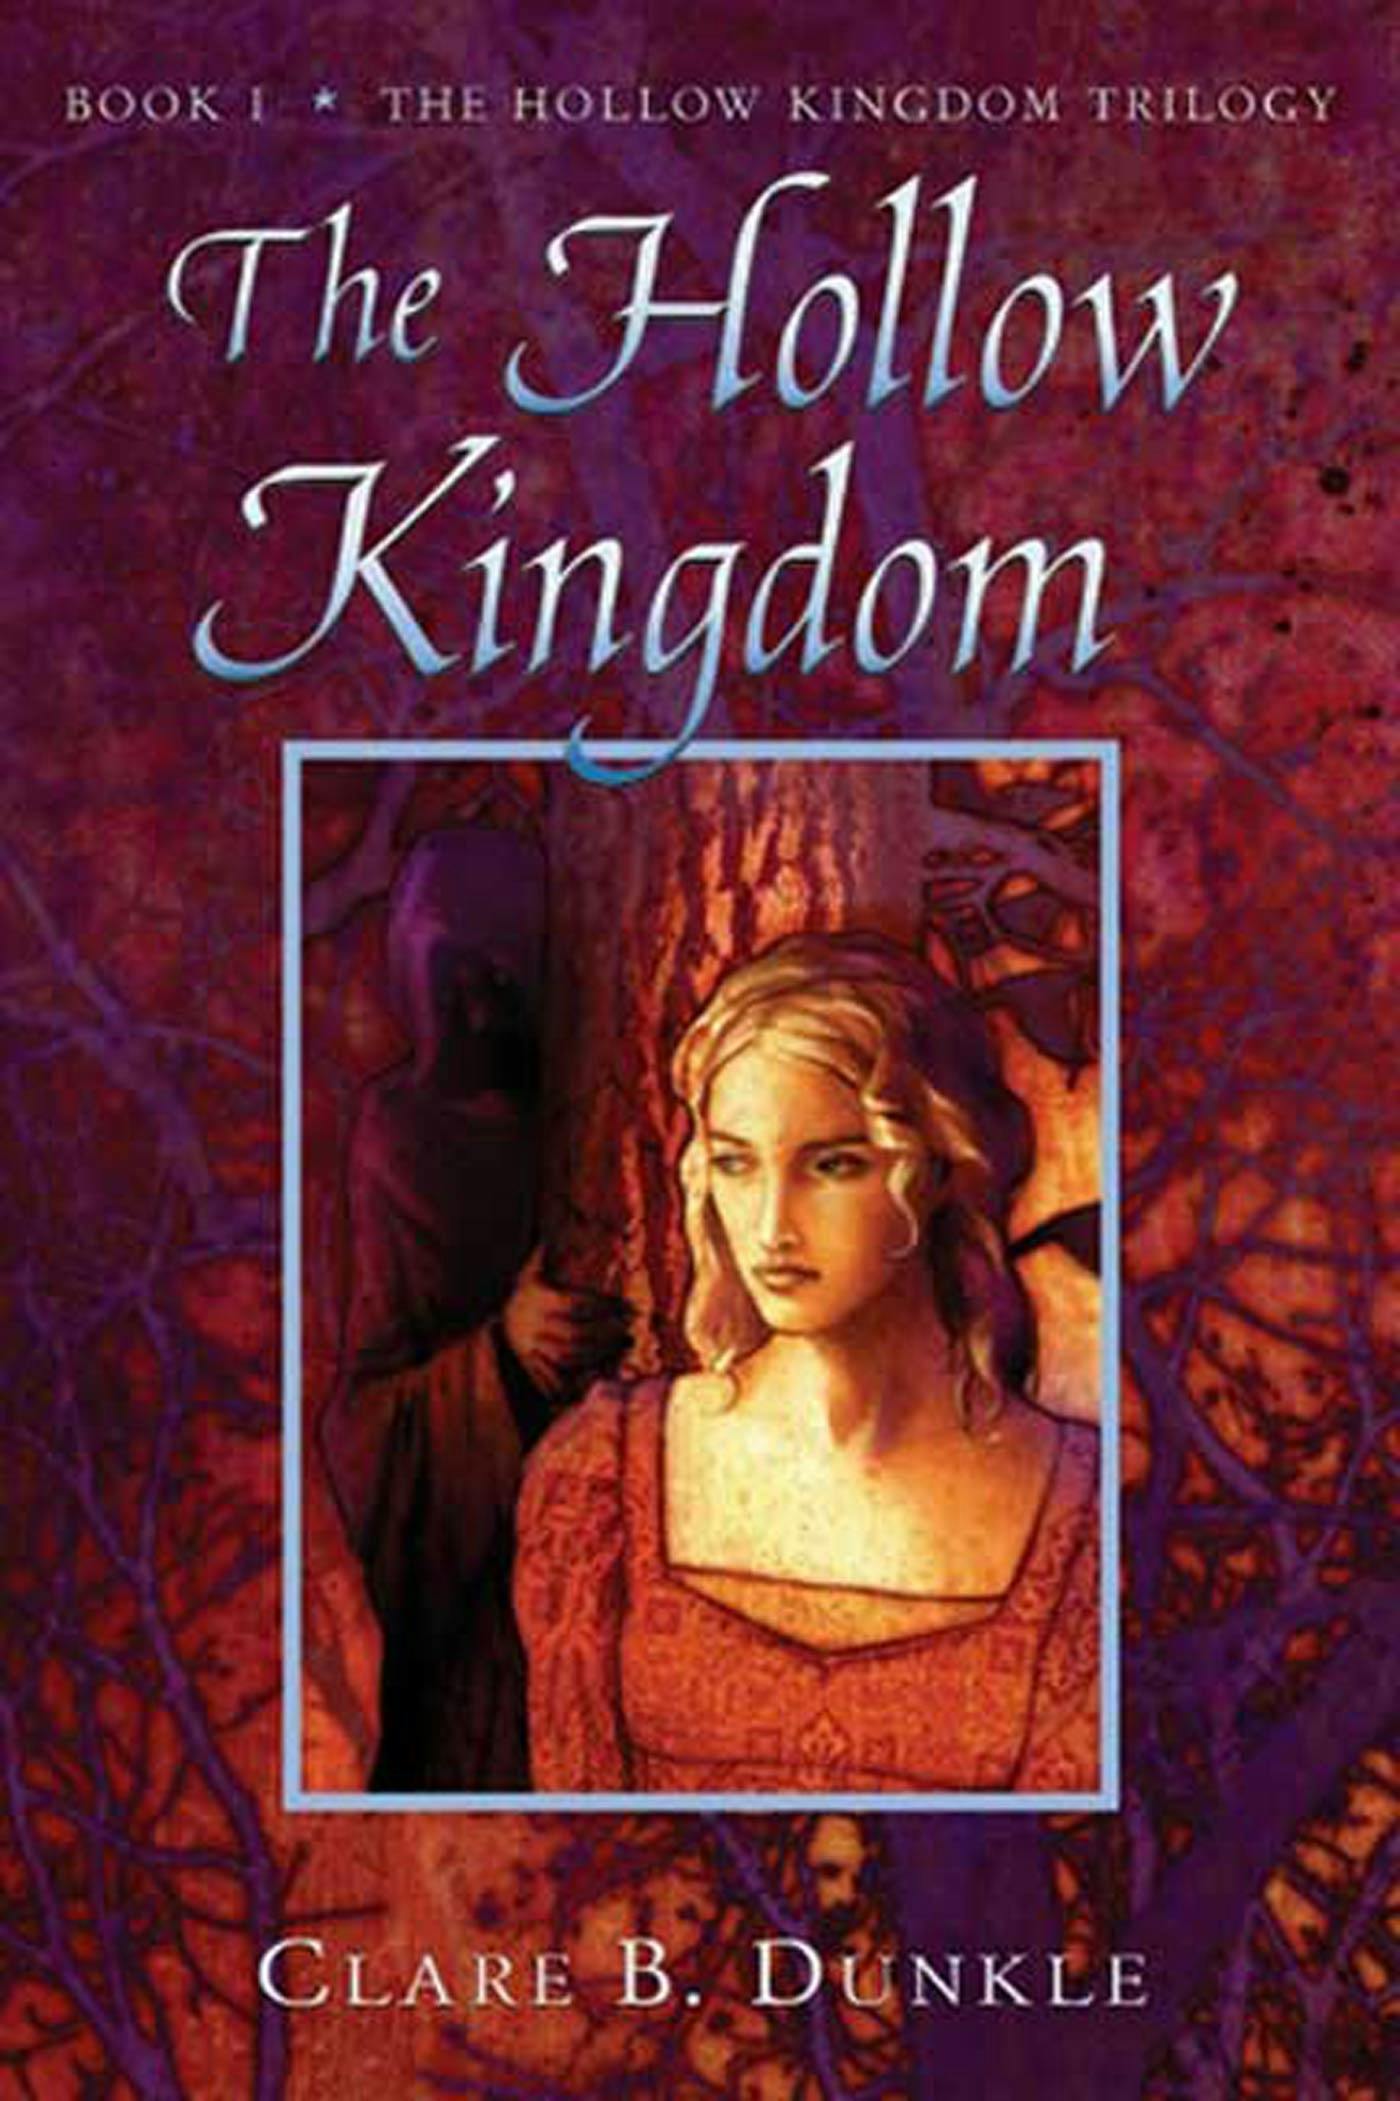 Image of The Hollow Kingdom